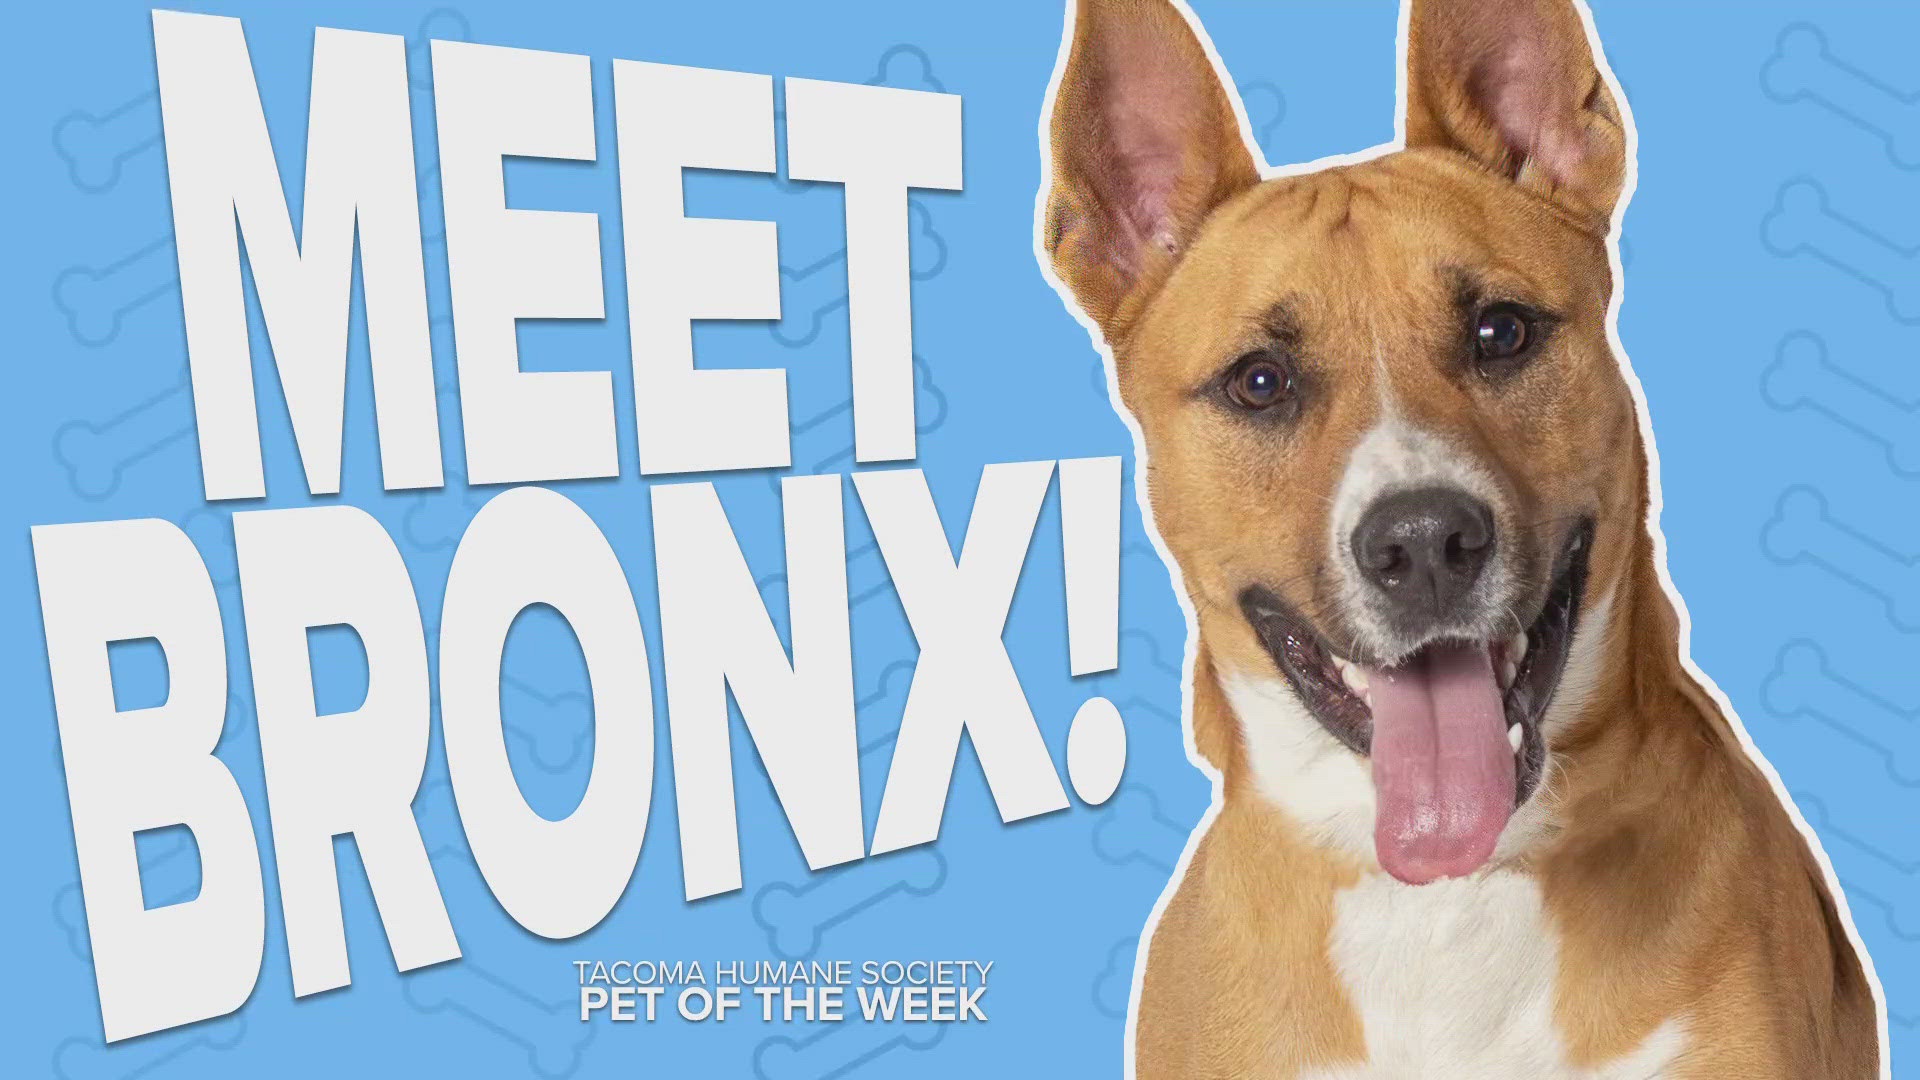 This week's featured adoptable pet is Bronx!